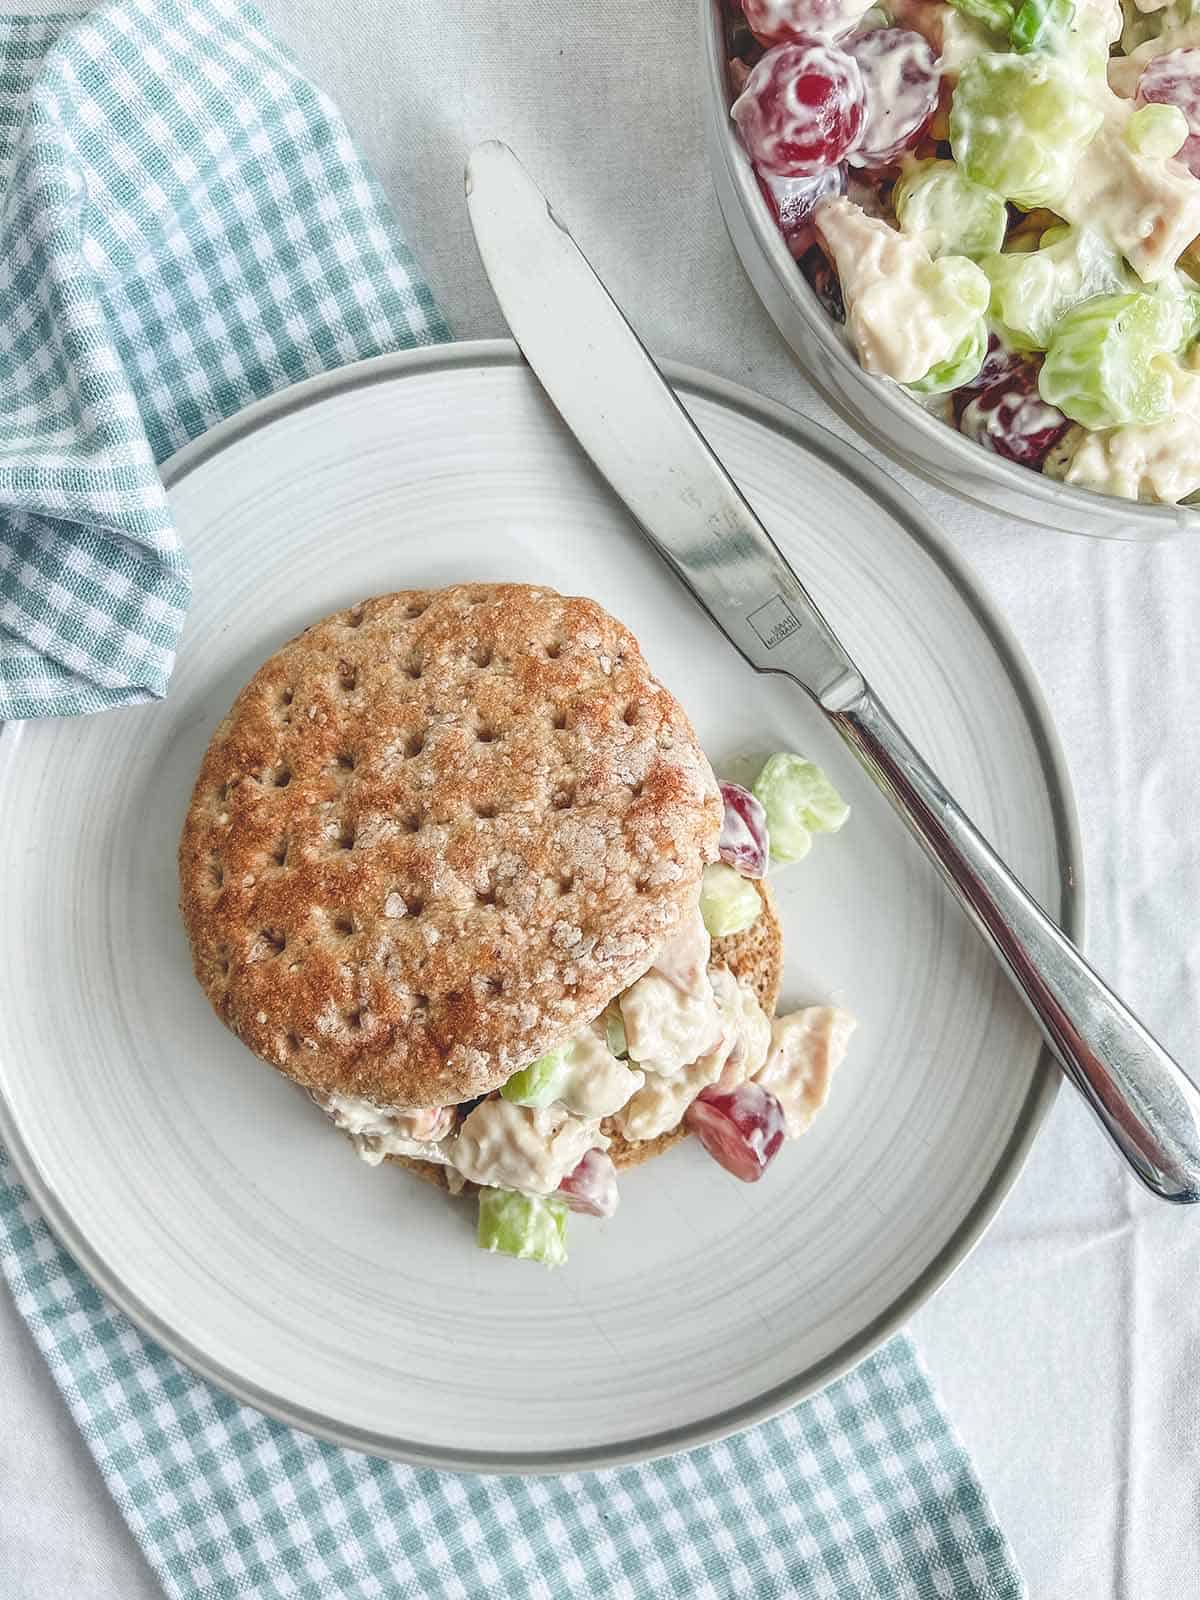 A sandwich bun and a bowl of chicken salad on a white table with a checkered napkin.